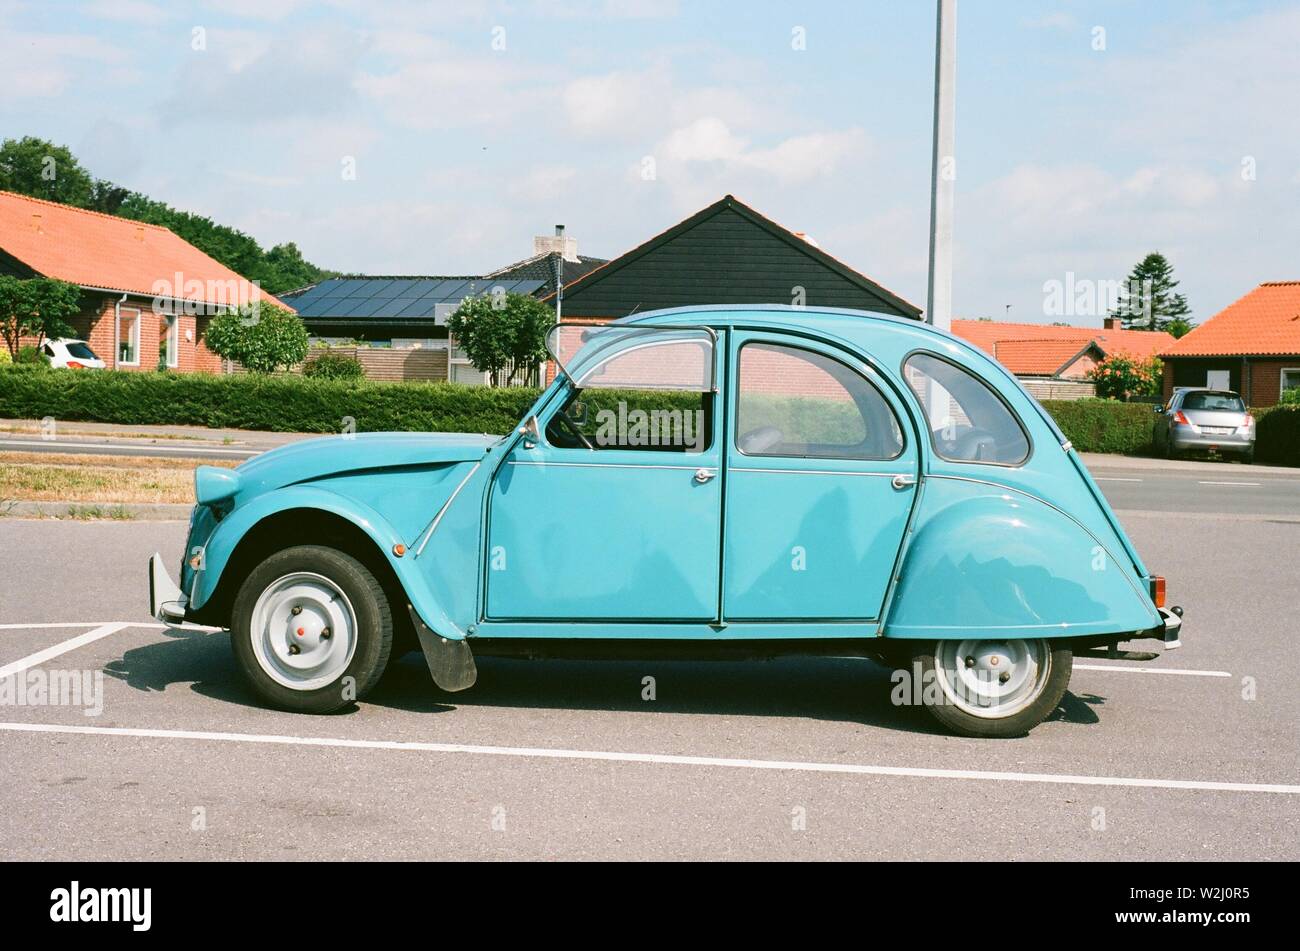 Blue Citroen Vintage car in a bright, sunny, parking lot. Summer in Denmark with cottages in background. Stock Photo